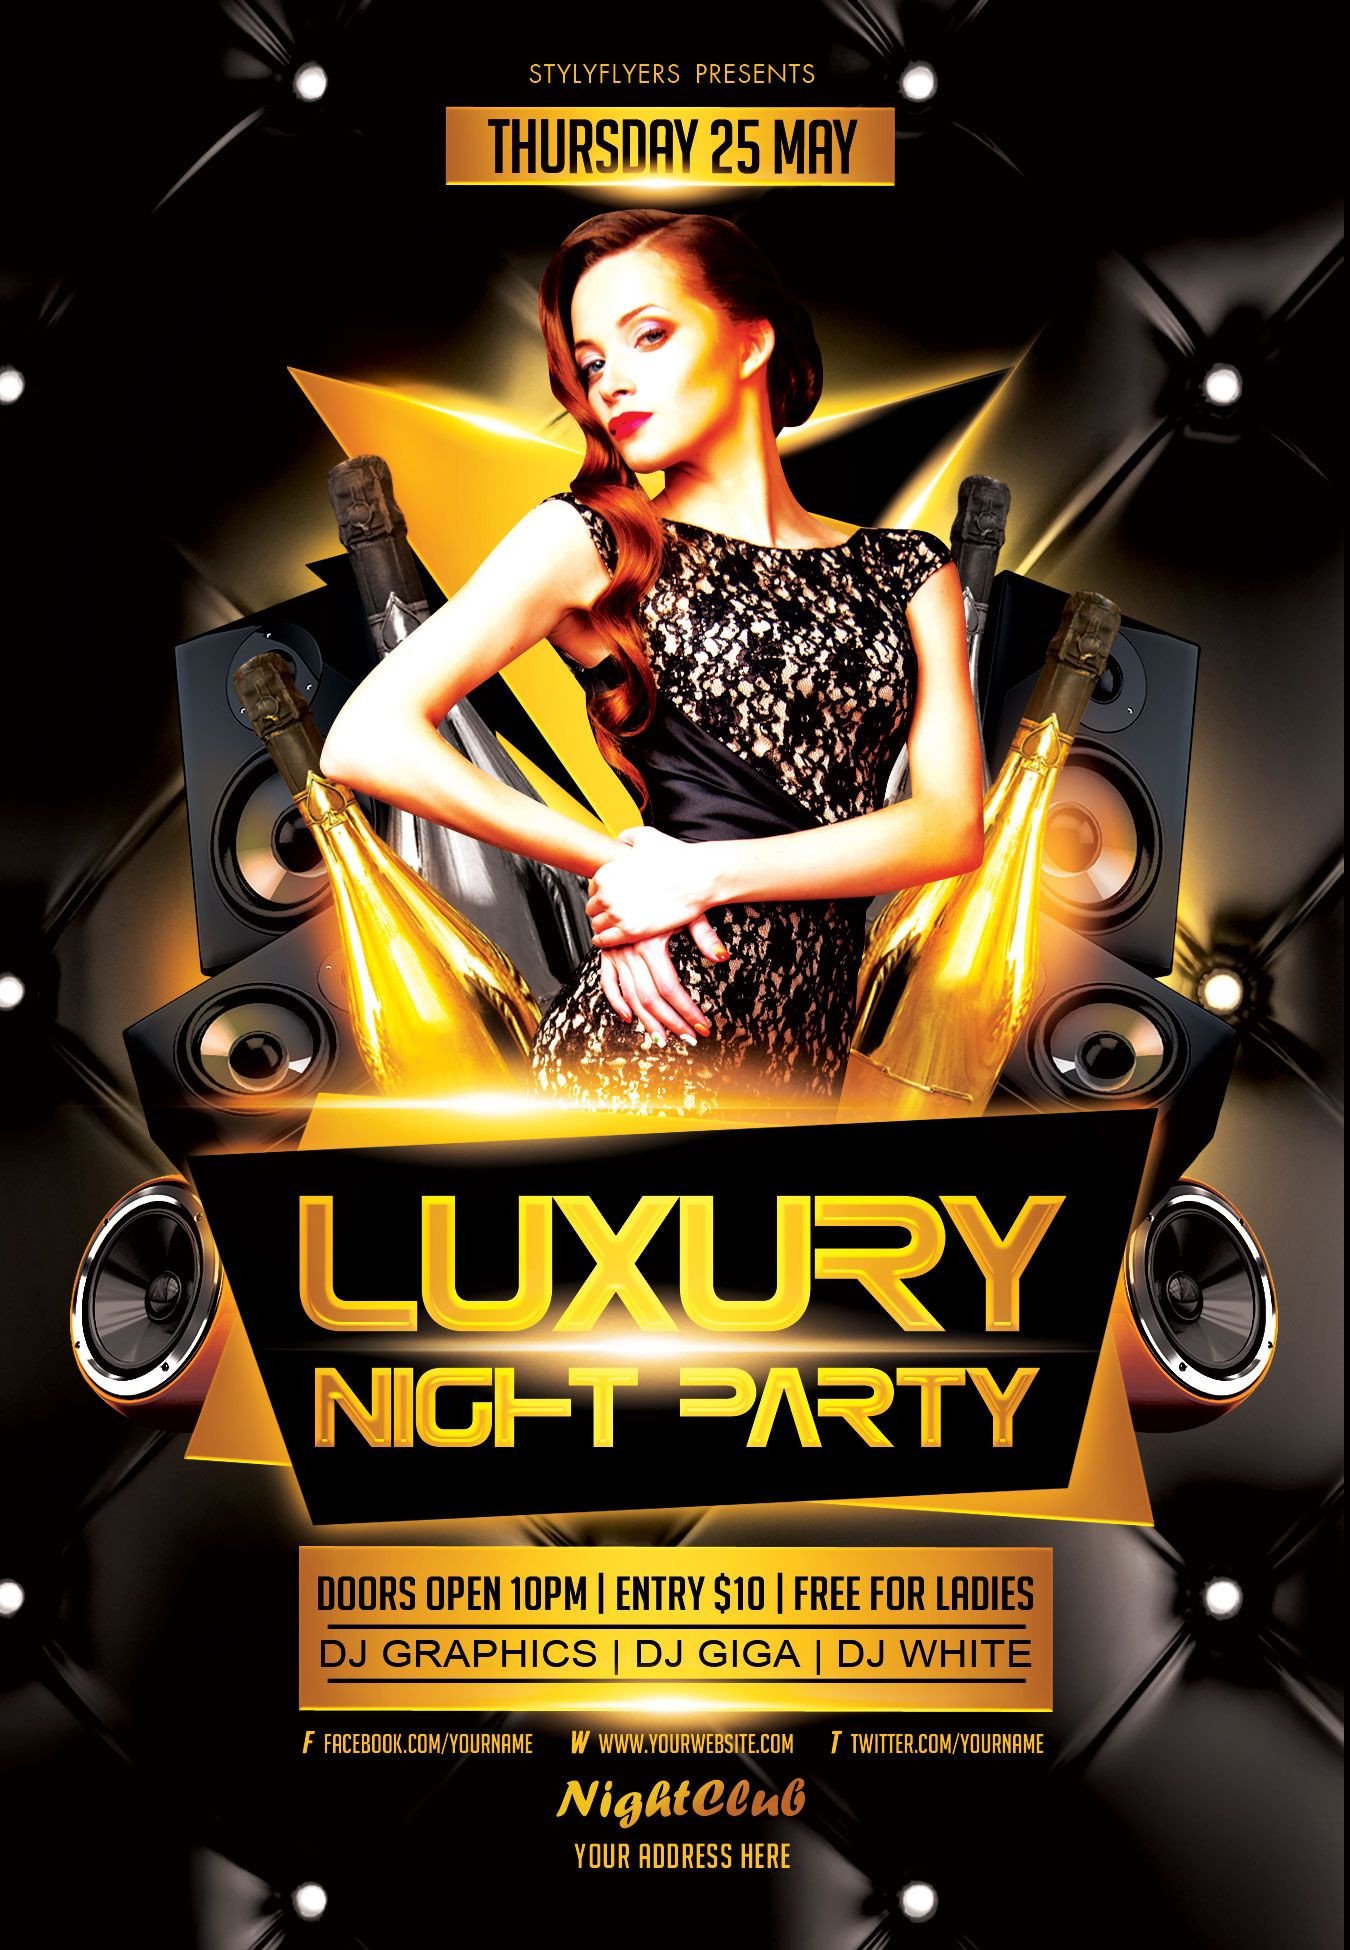 Free Party Flyer Templates Free Luxury Night Party Flyer Psd Template by Styleflyer